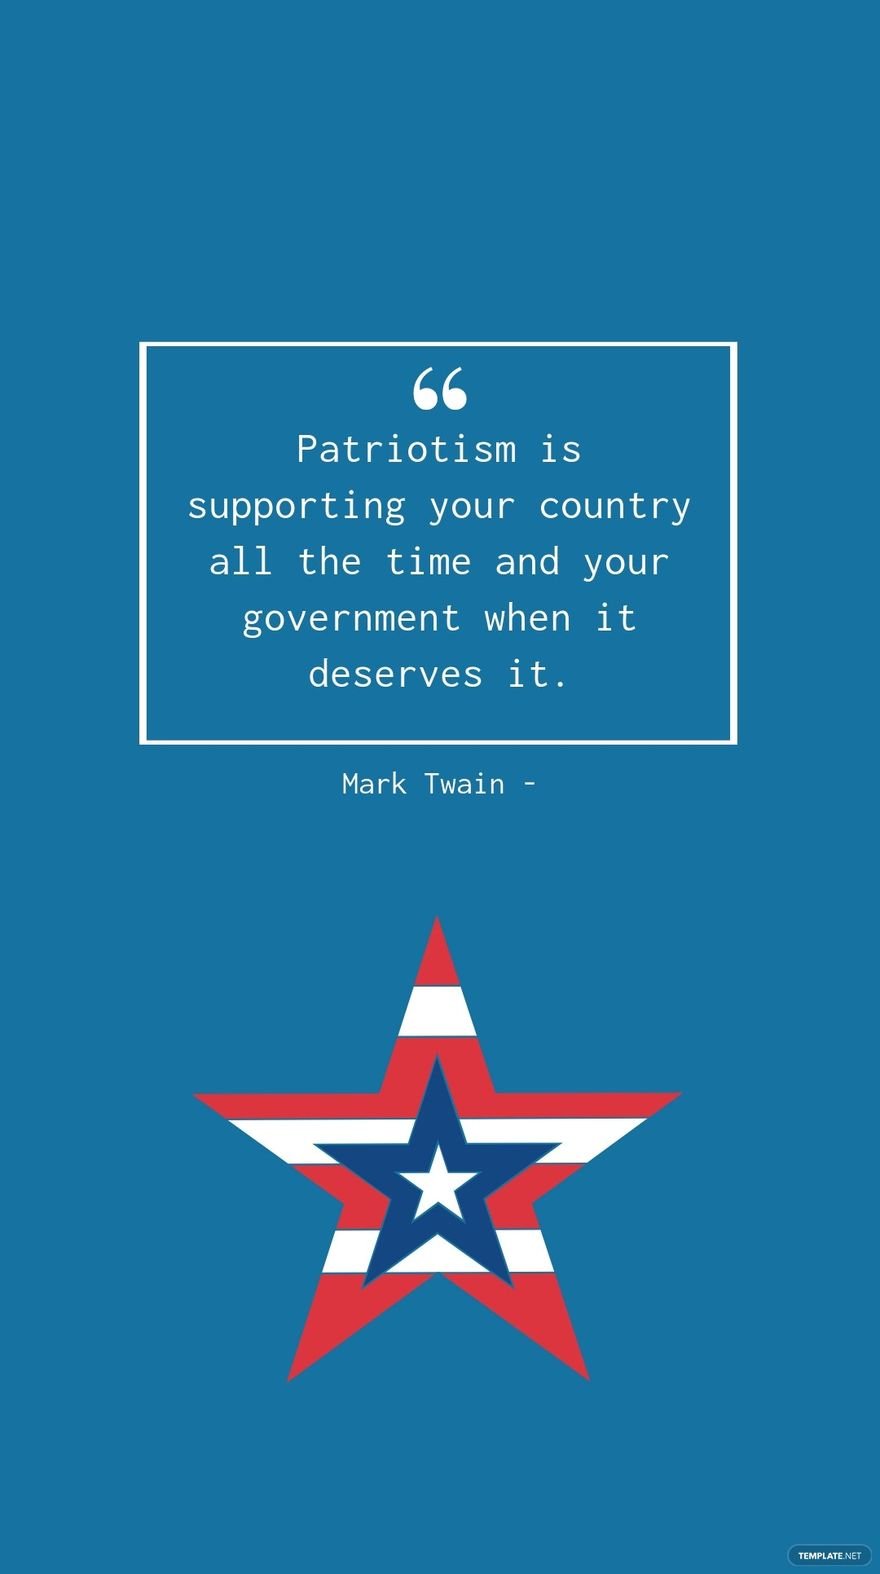 Free Mark Twain - Patriotism is supporting your country all the time and your government when it deserves it.